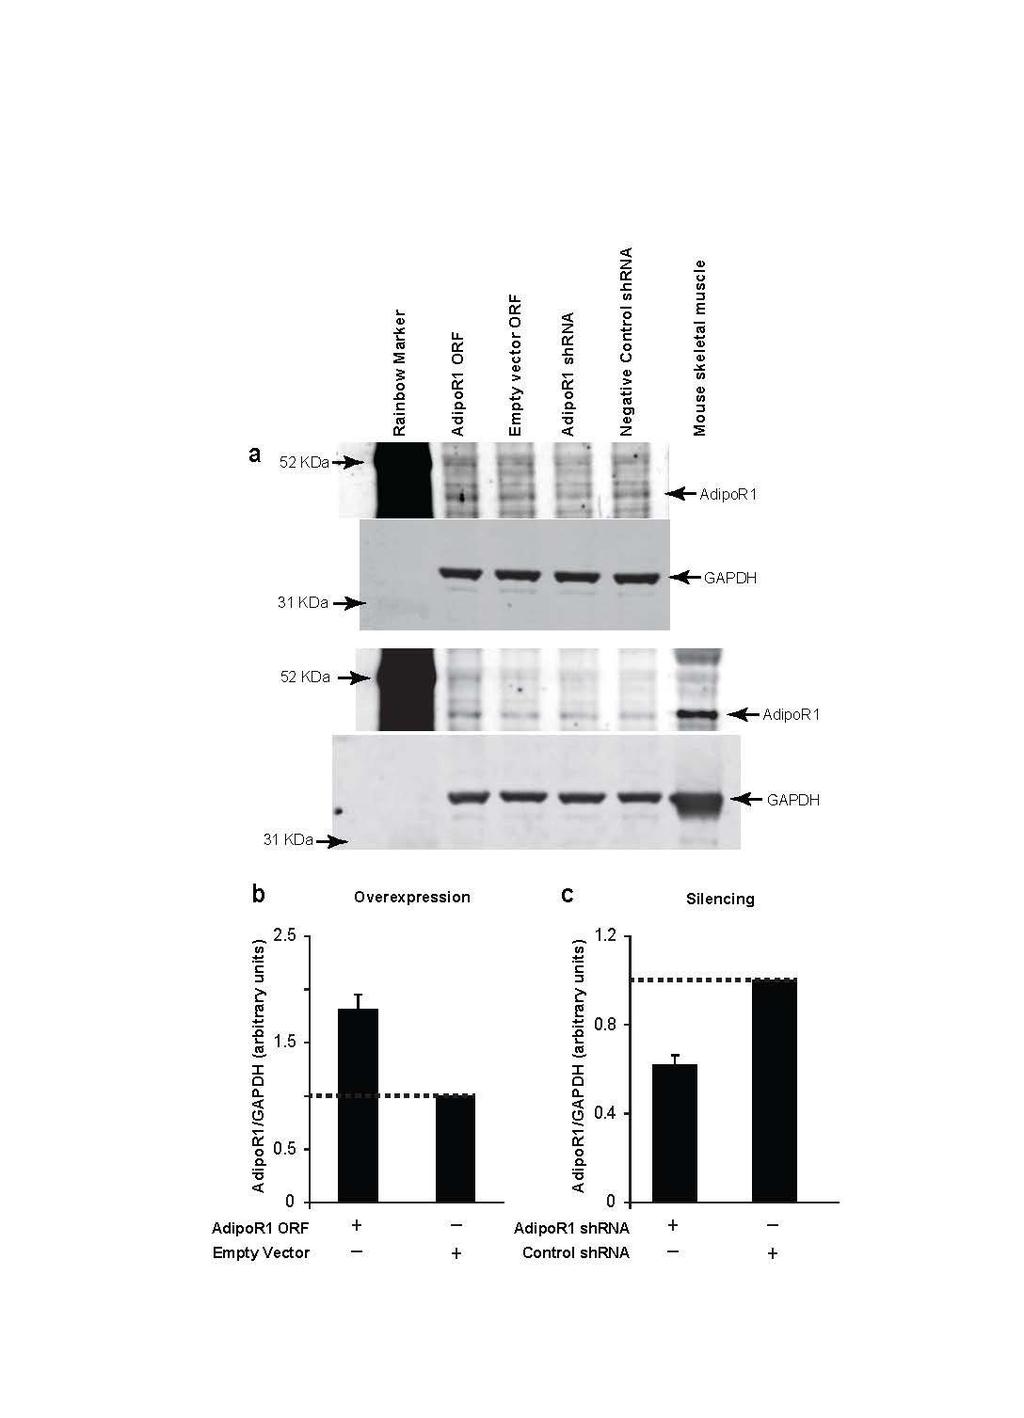 Supplementary Figure 1. AdipoR1 silencing and overexpression controls.